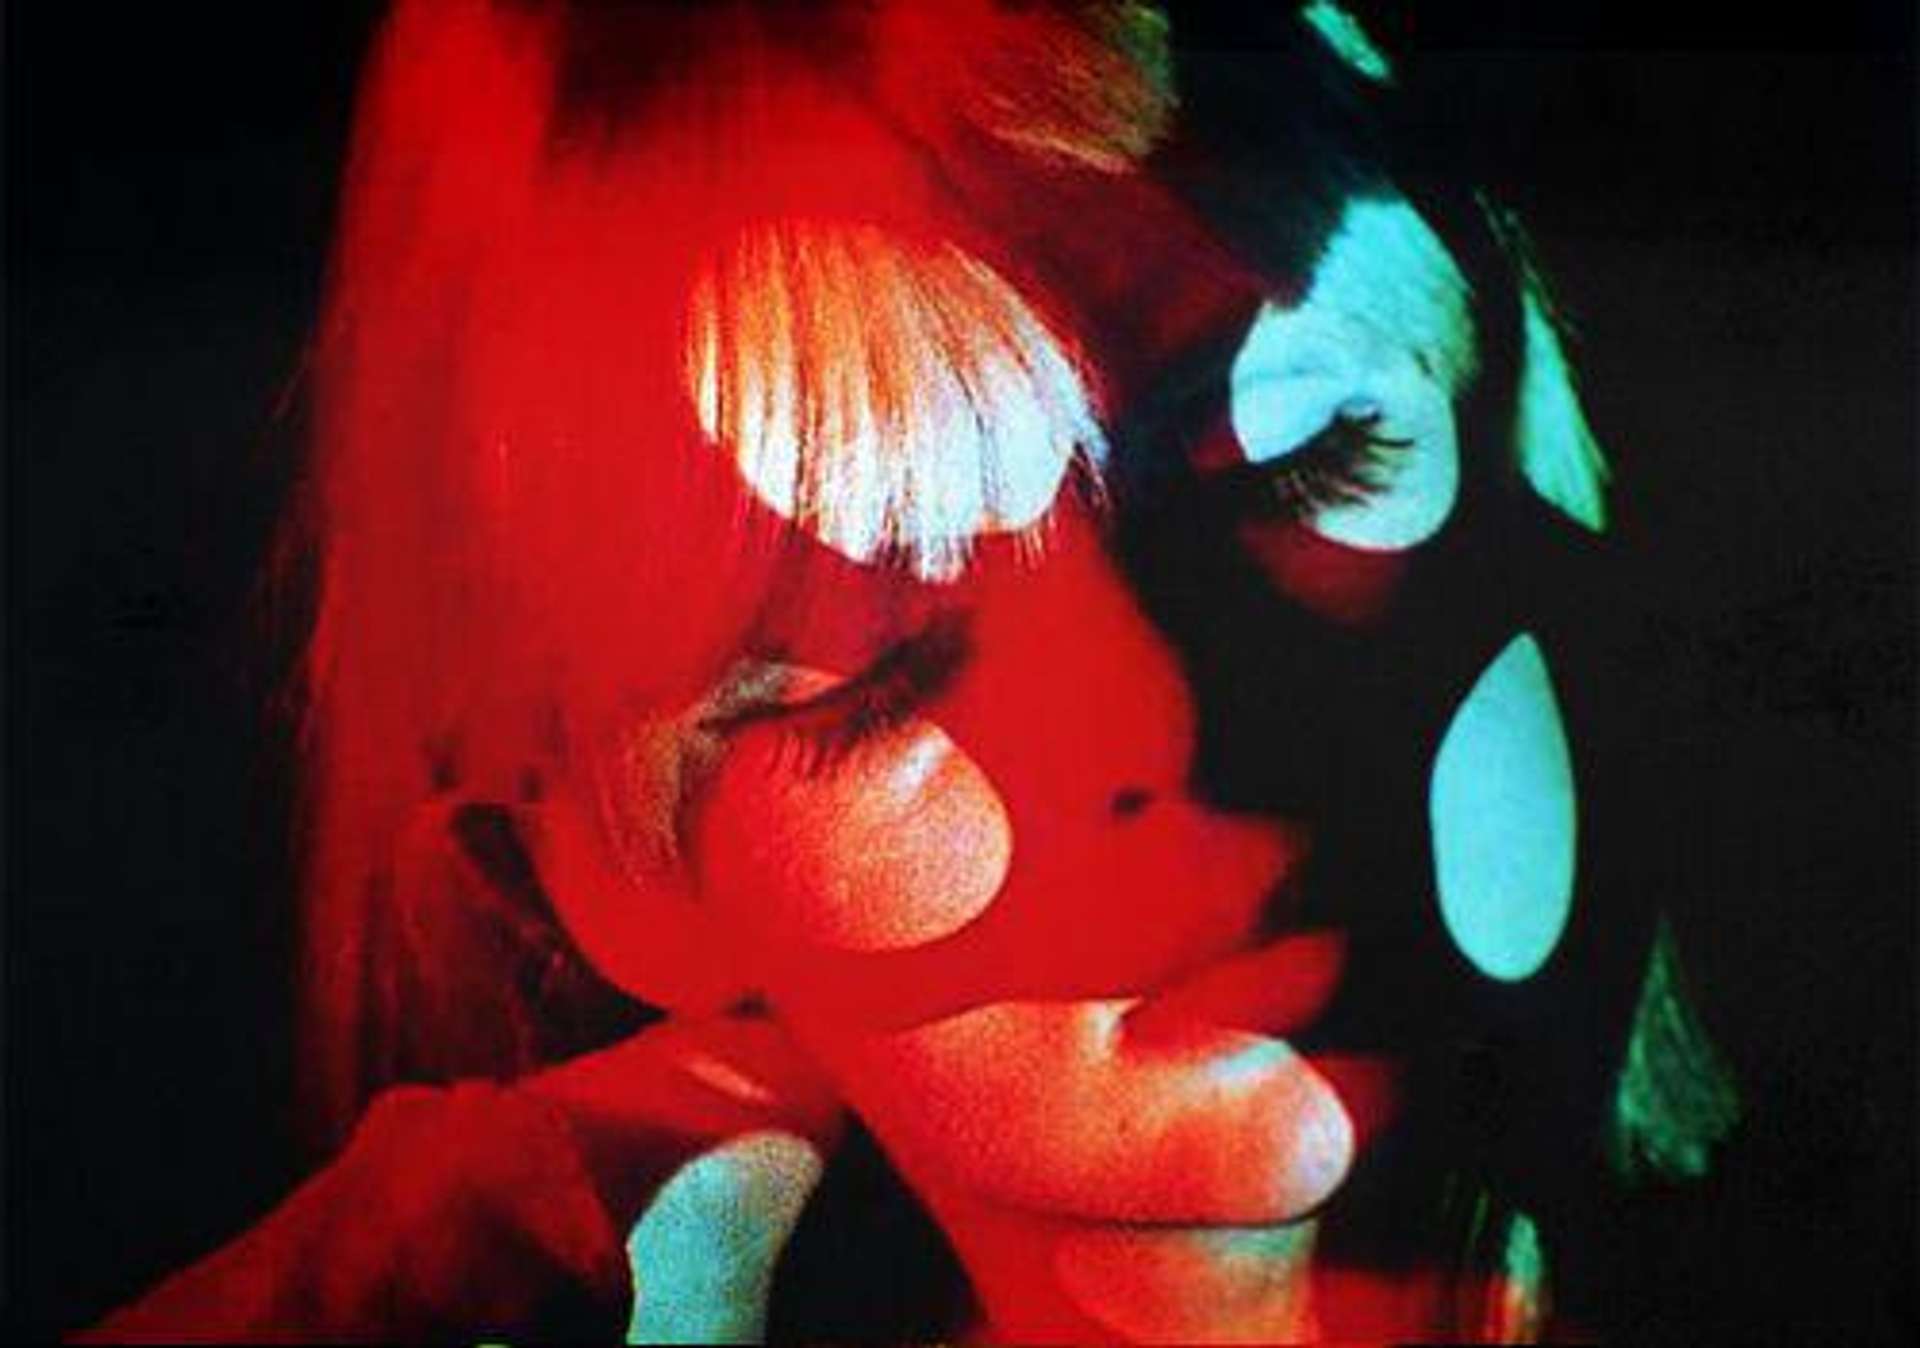 Nico in Exploding Plastic Inevitable by Andy Warhol